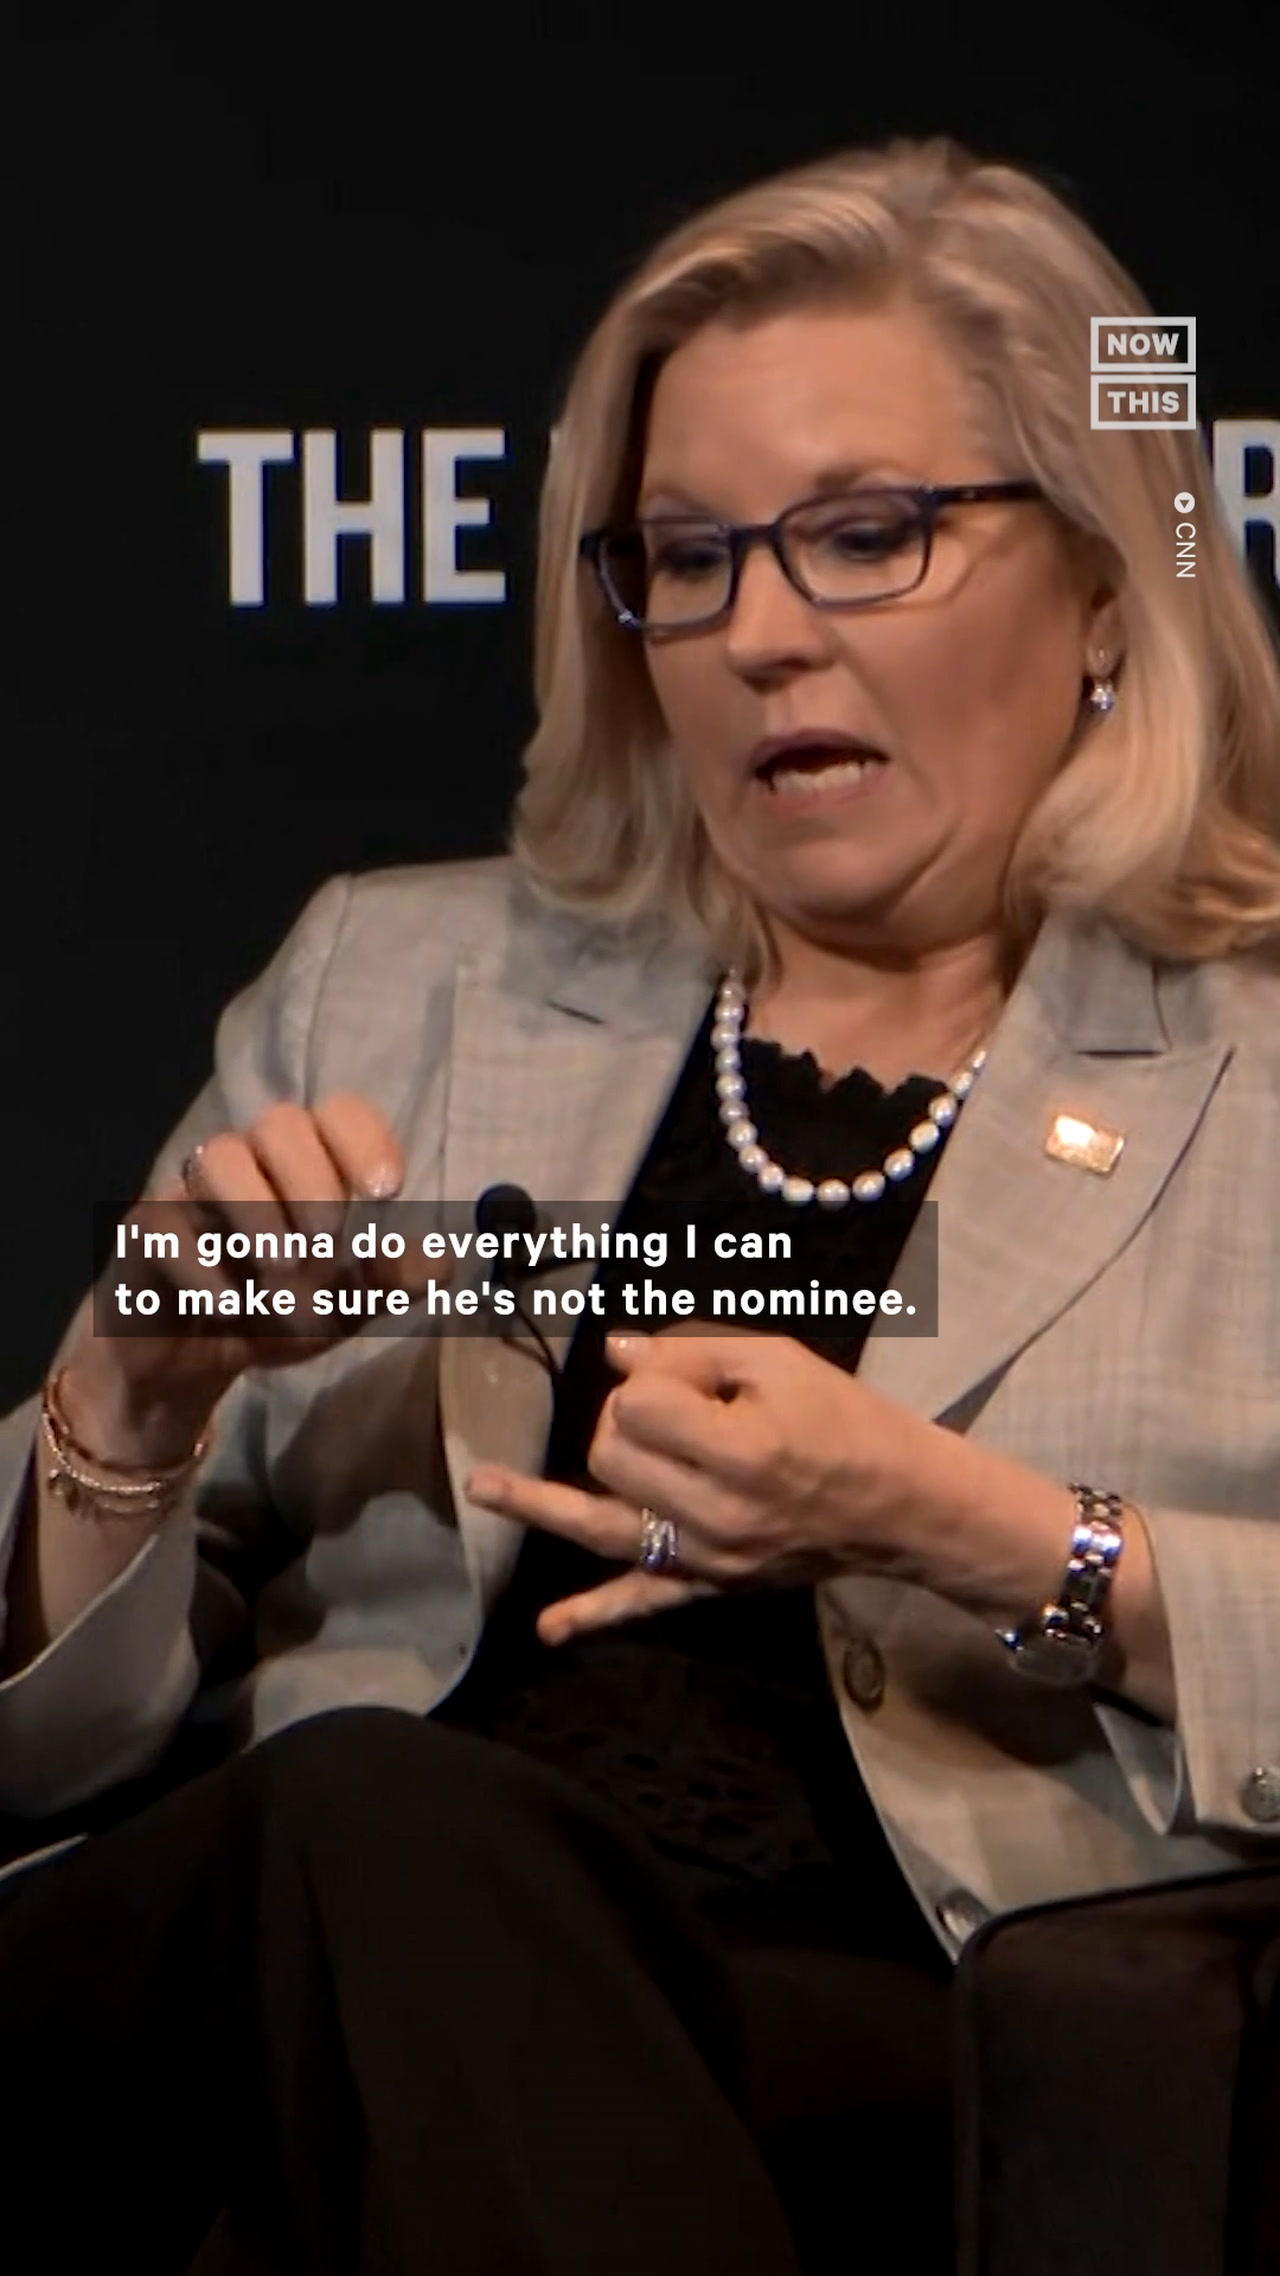 Liz Cheney Says She'll Leave the GOP if Trump is the 2024 Nominee